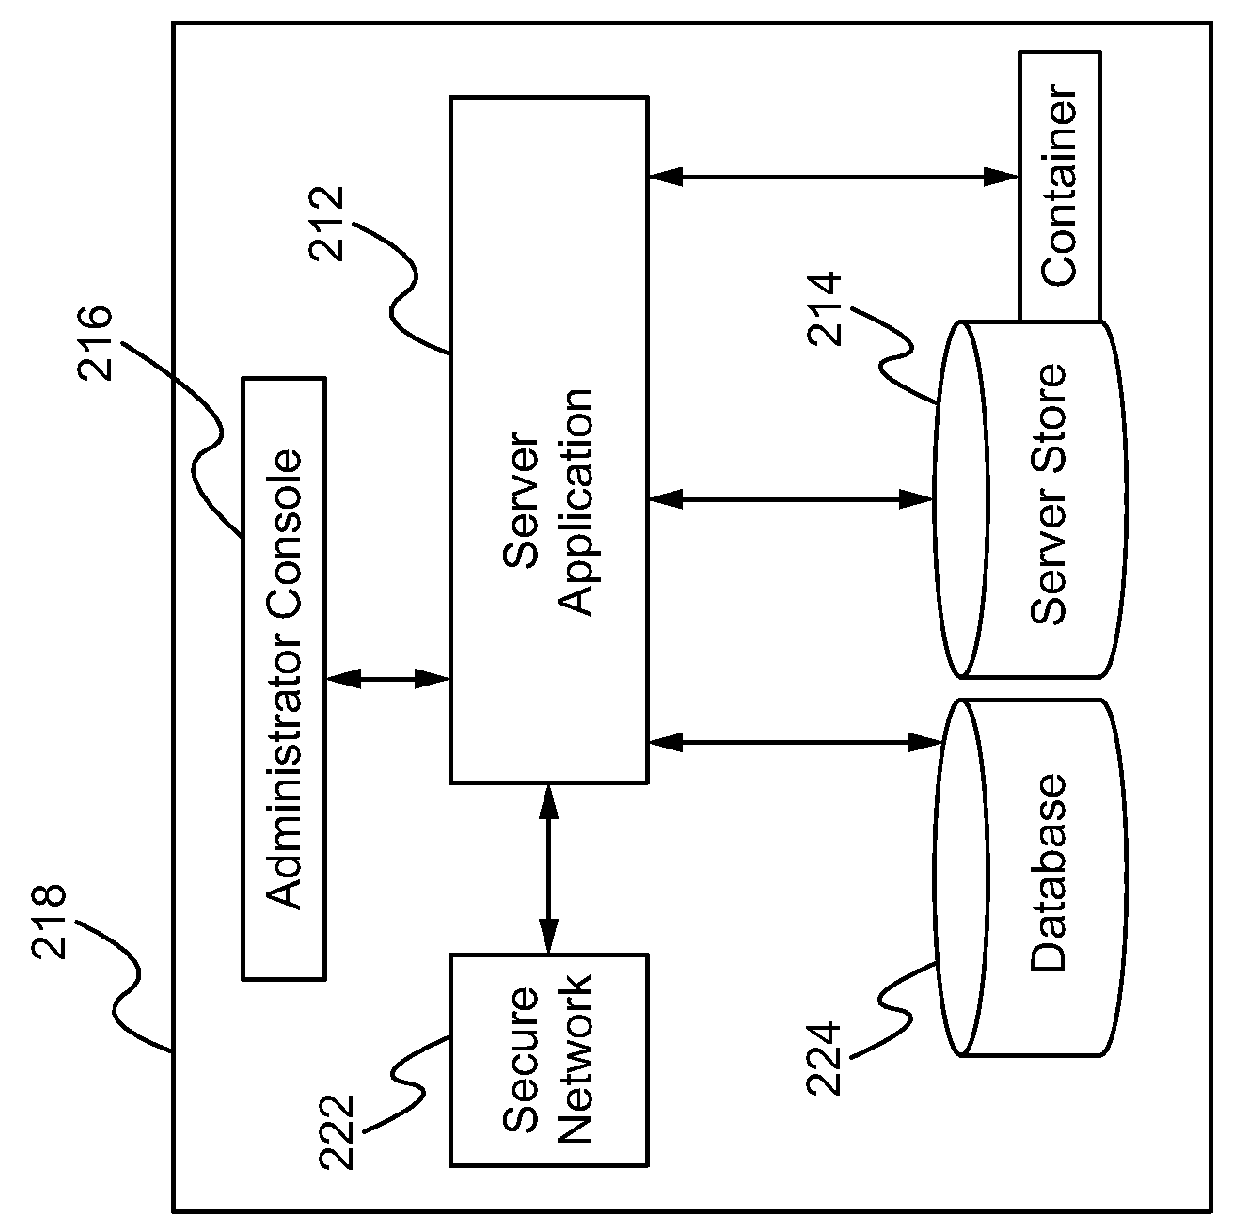 System and associated software for providing advanced data protections in a defense-in-depth system by integrating multi-factor authentication with cryptographic offloading